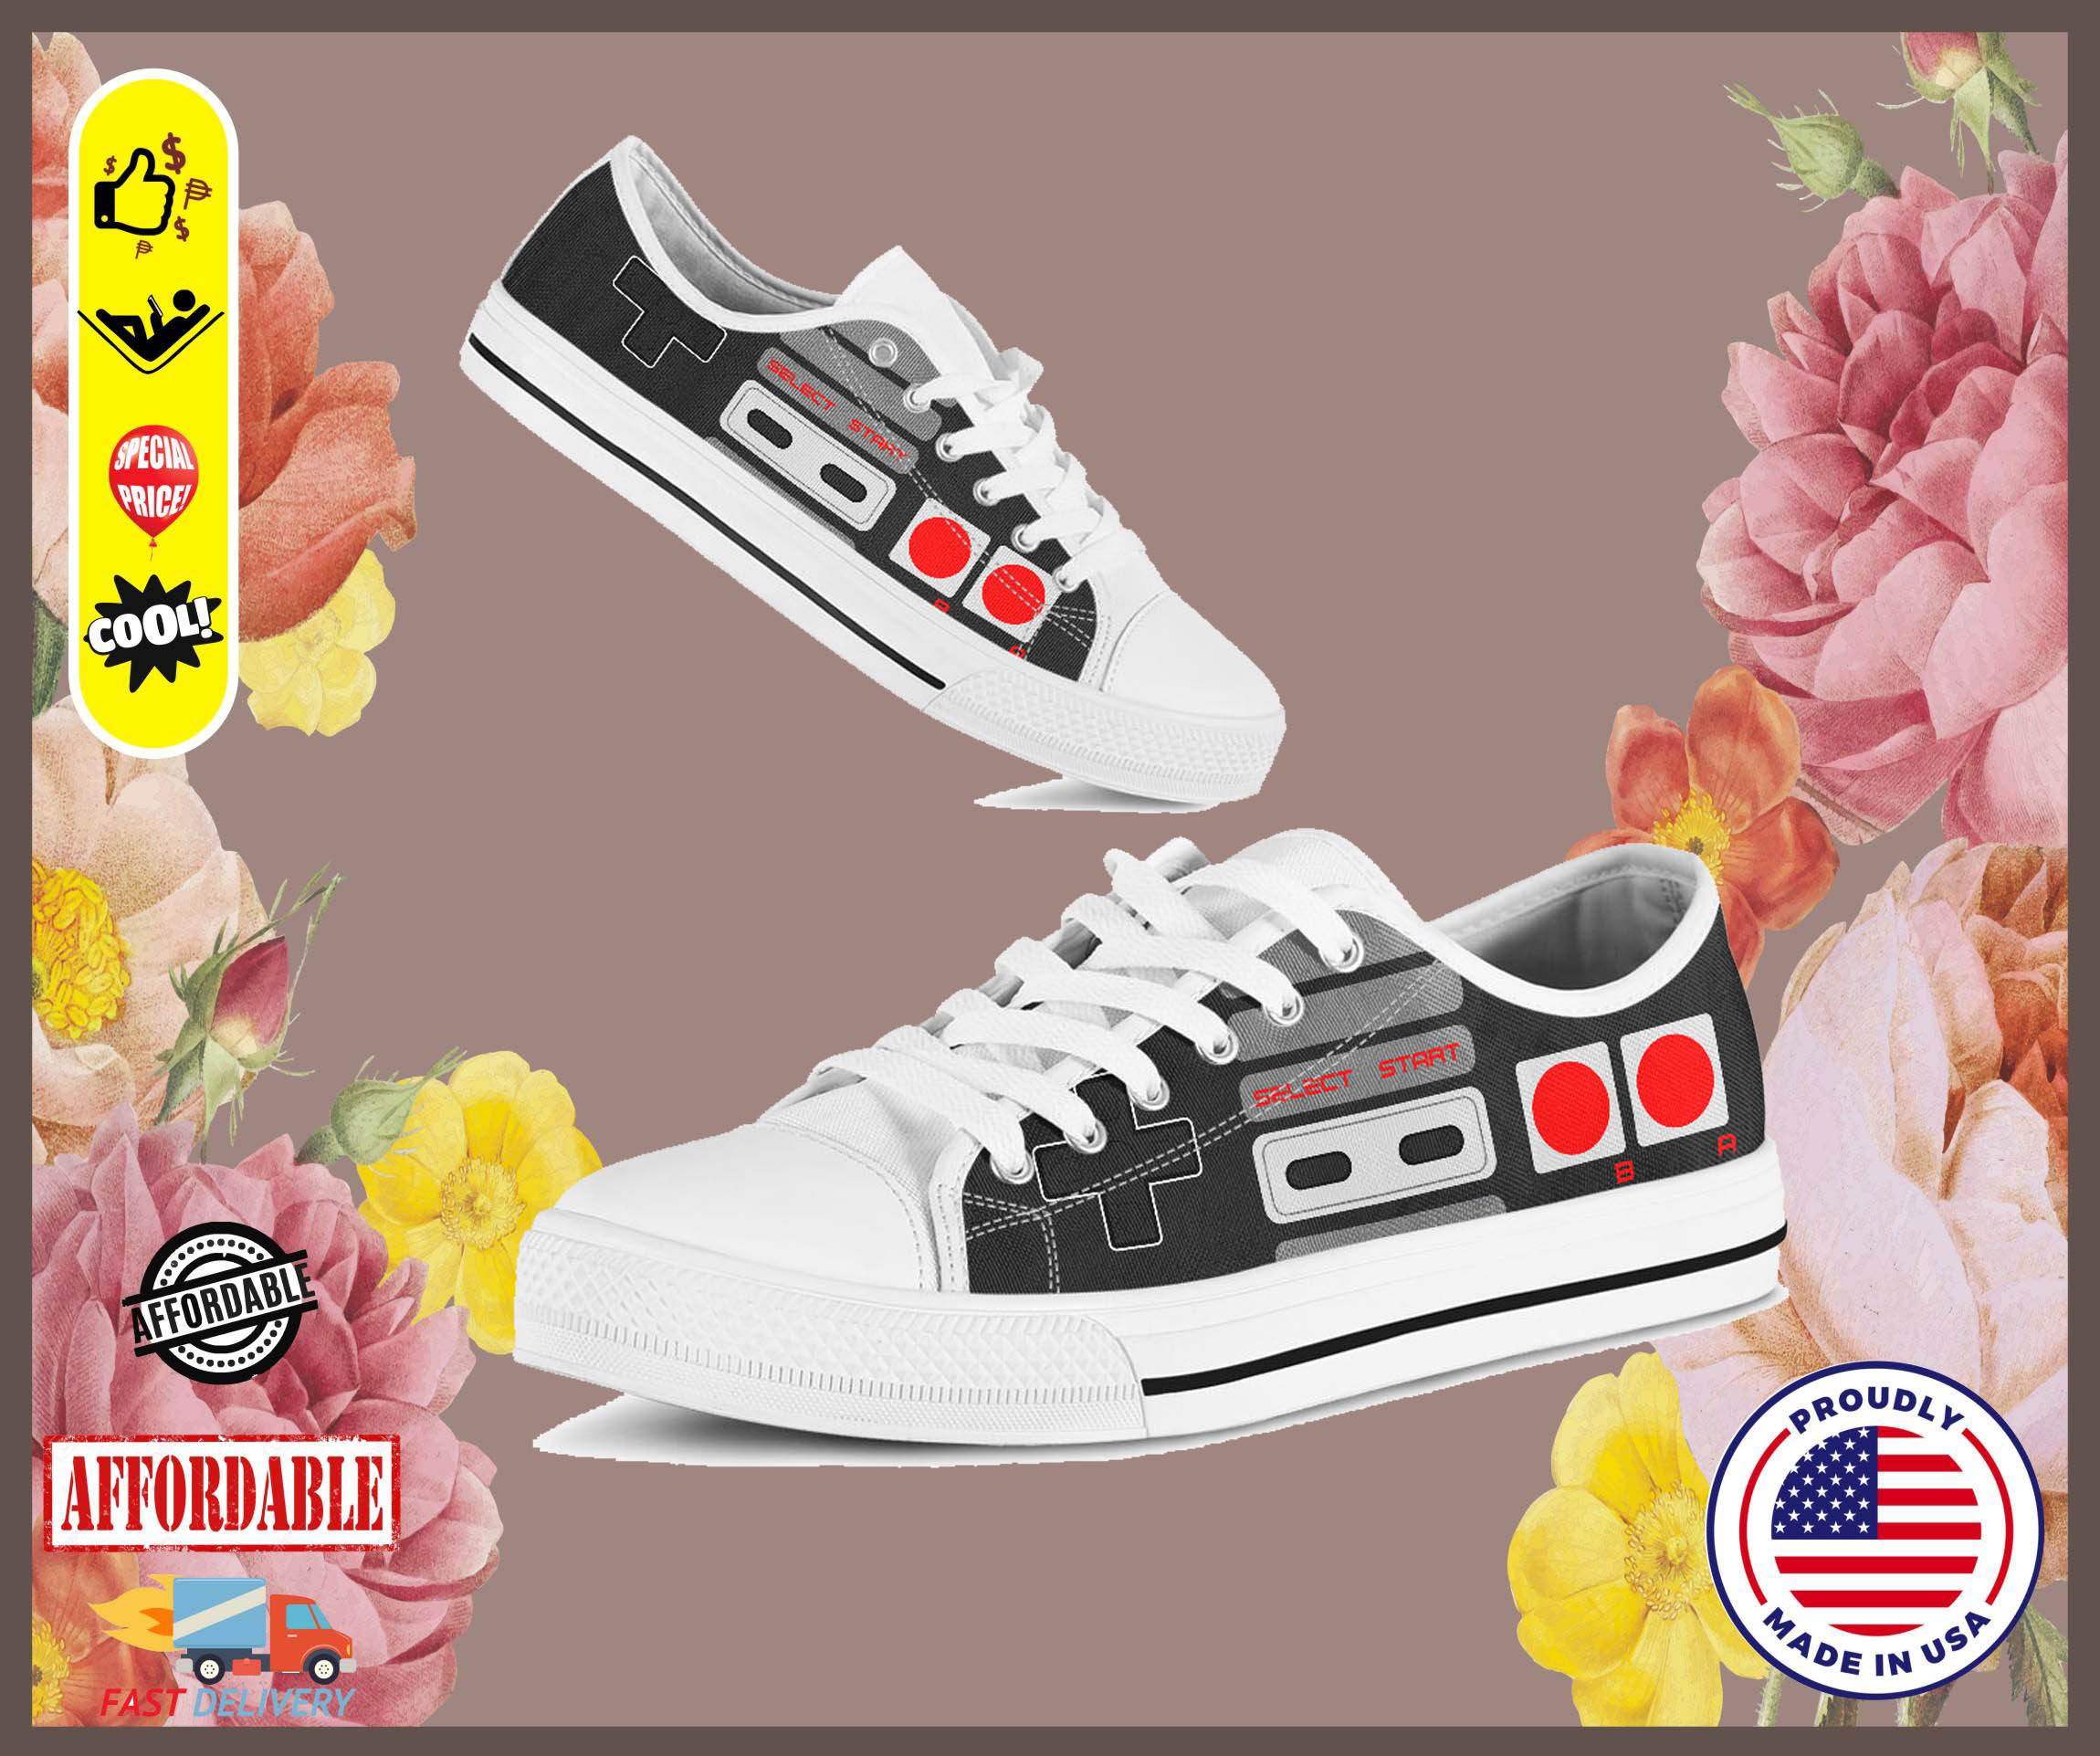 Game controller luxury low top shoes